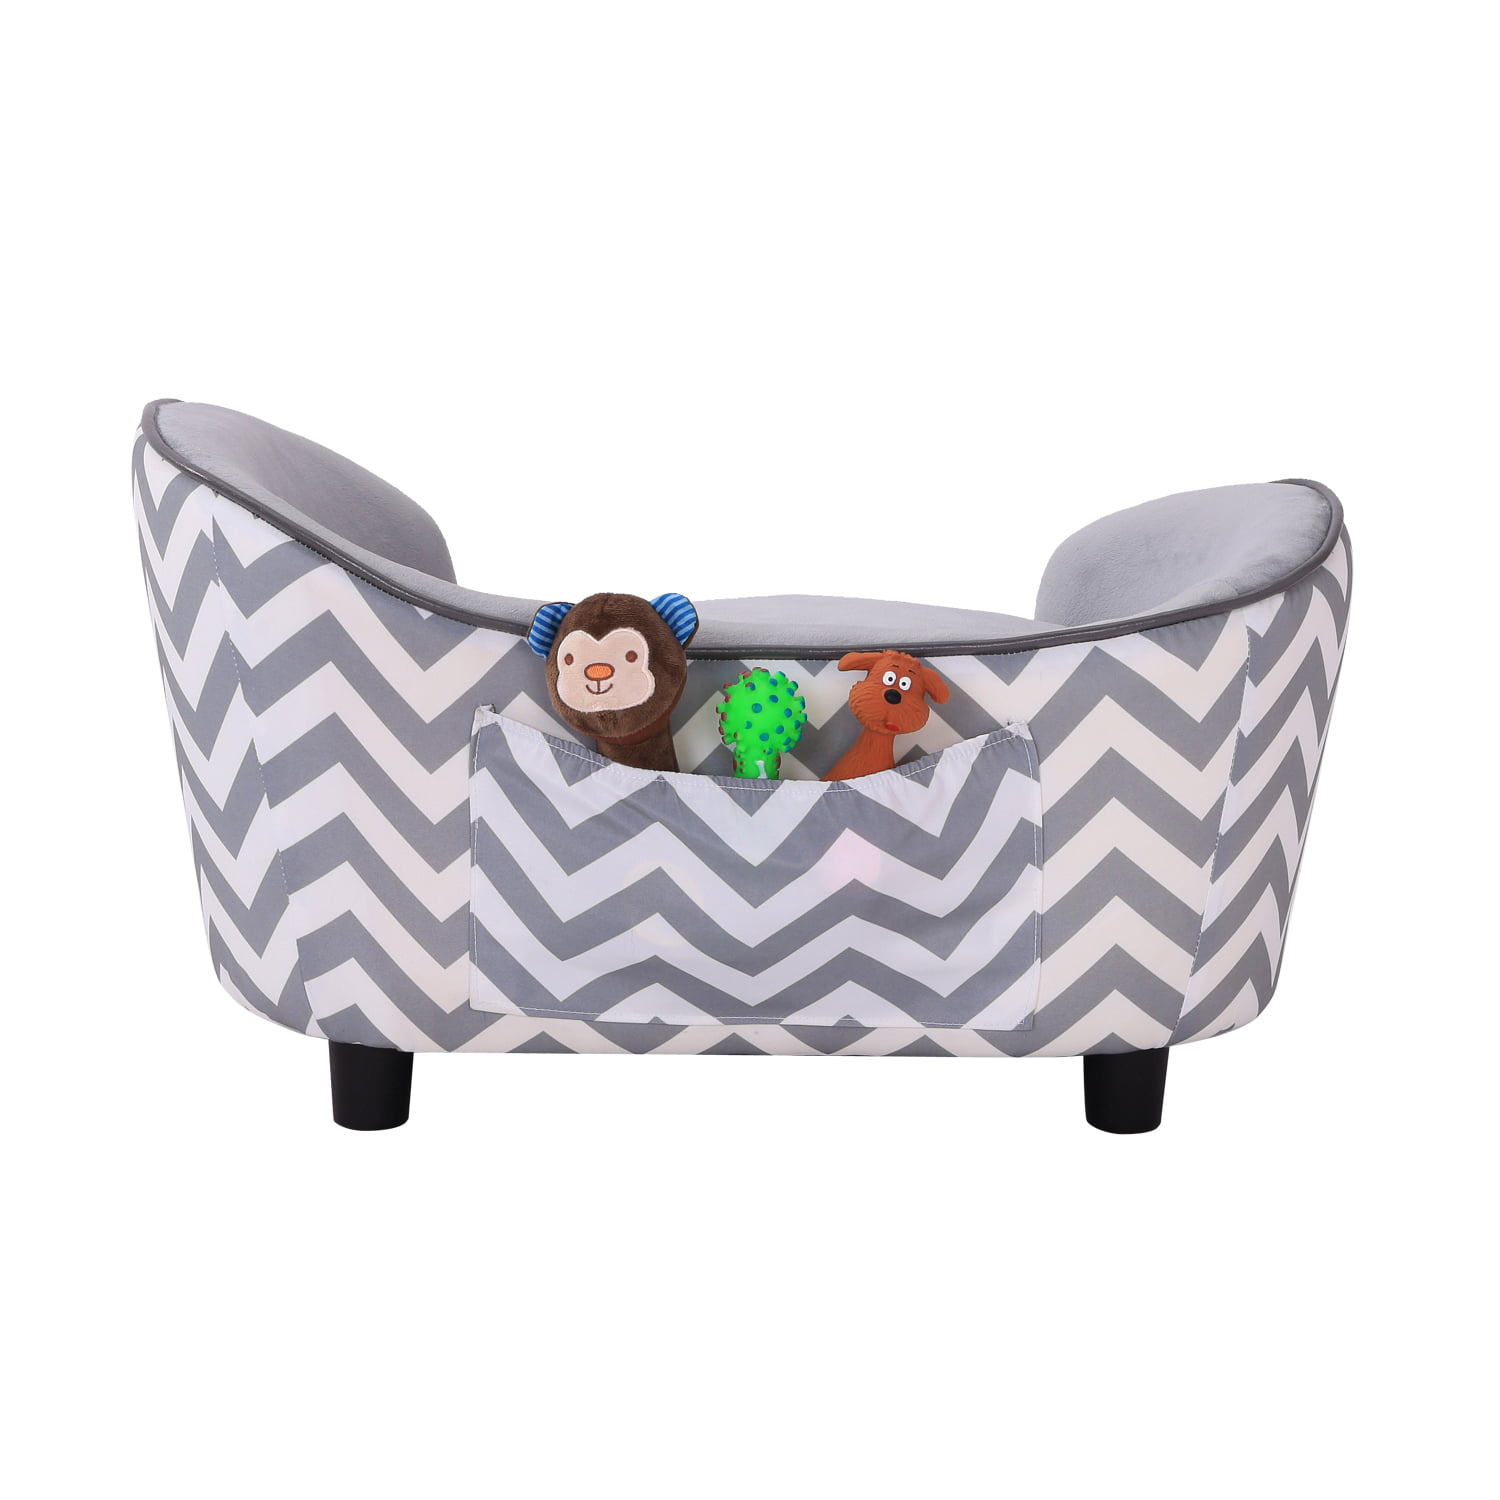 PawHut Pet Soft Warm Sofa Elevated Dog Puppy Sleeping Bed Raised Lounge Couch Bolster Side Pet Furniture Grey Aosom Canada